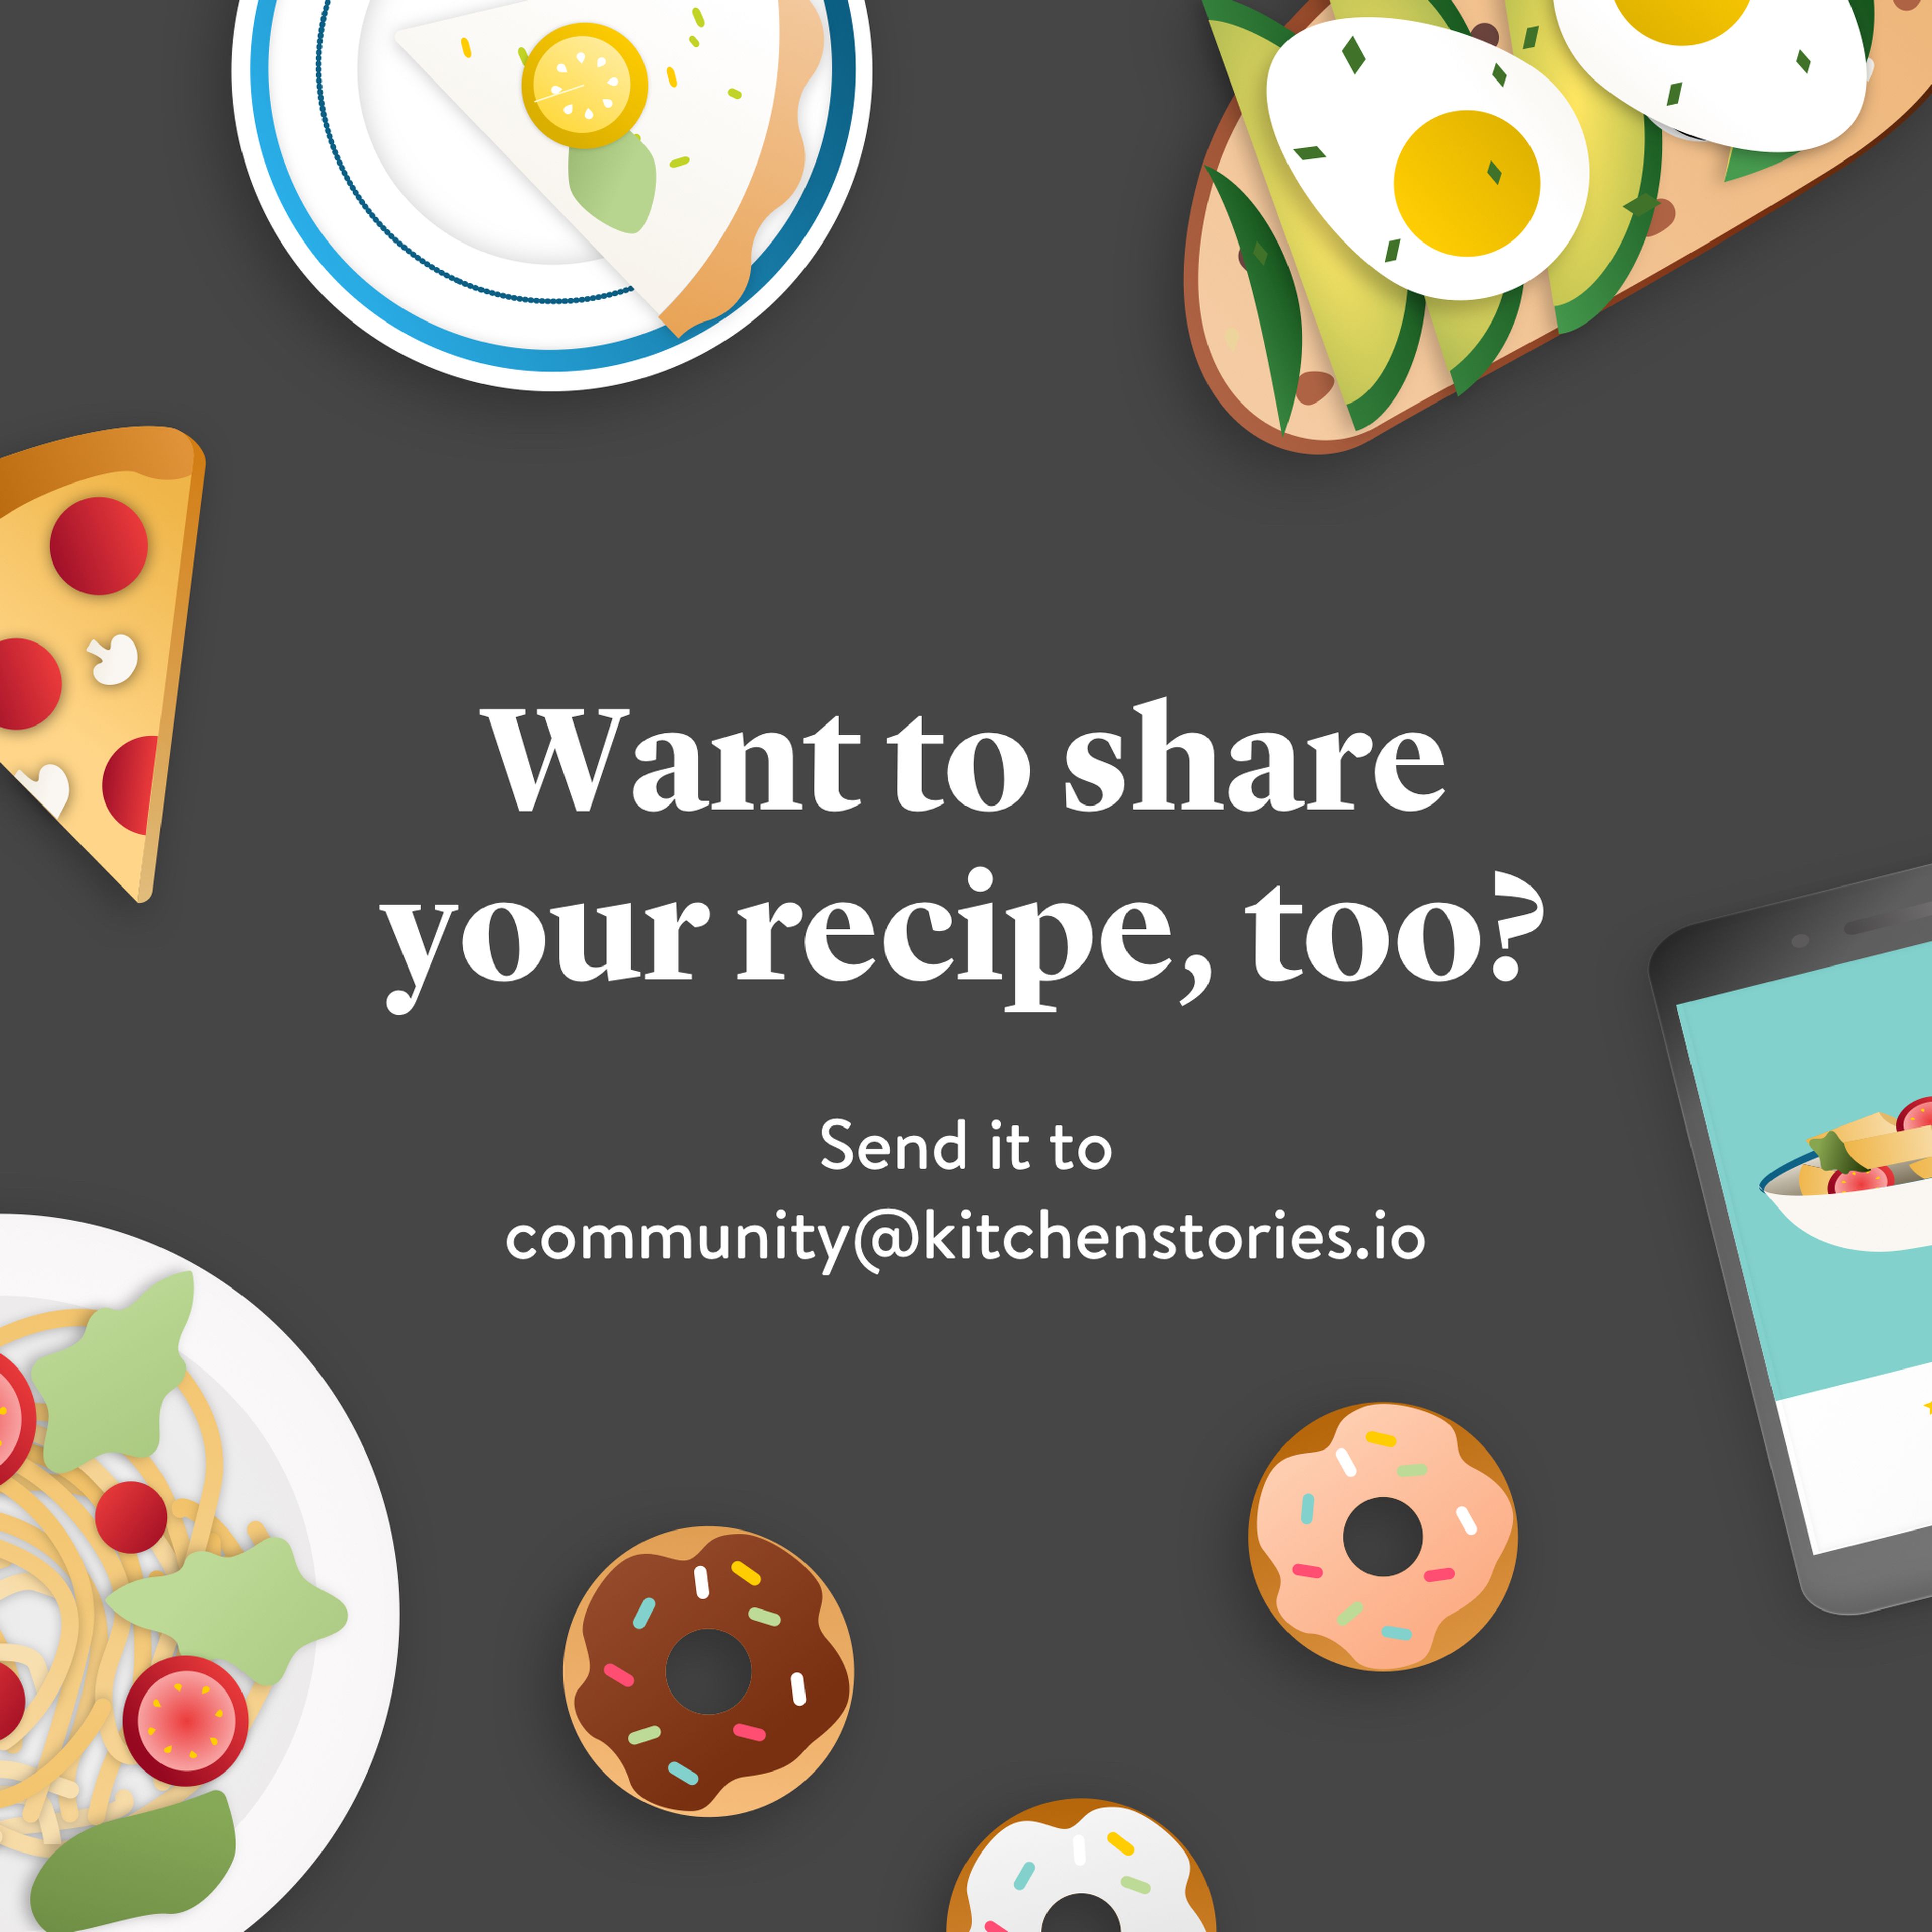 Show us what you've got by sending your recipe to community@kitchenstories.io